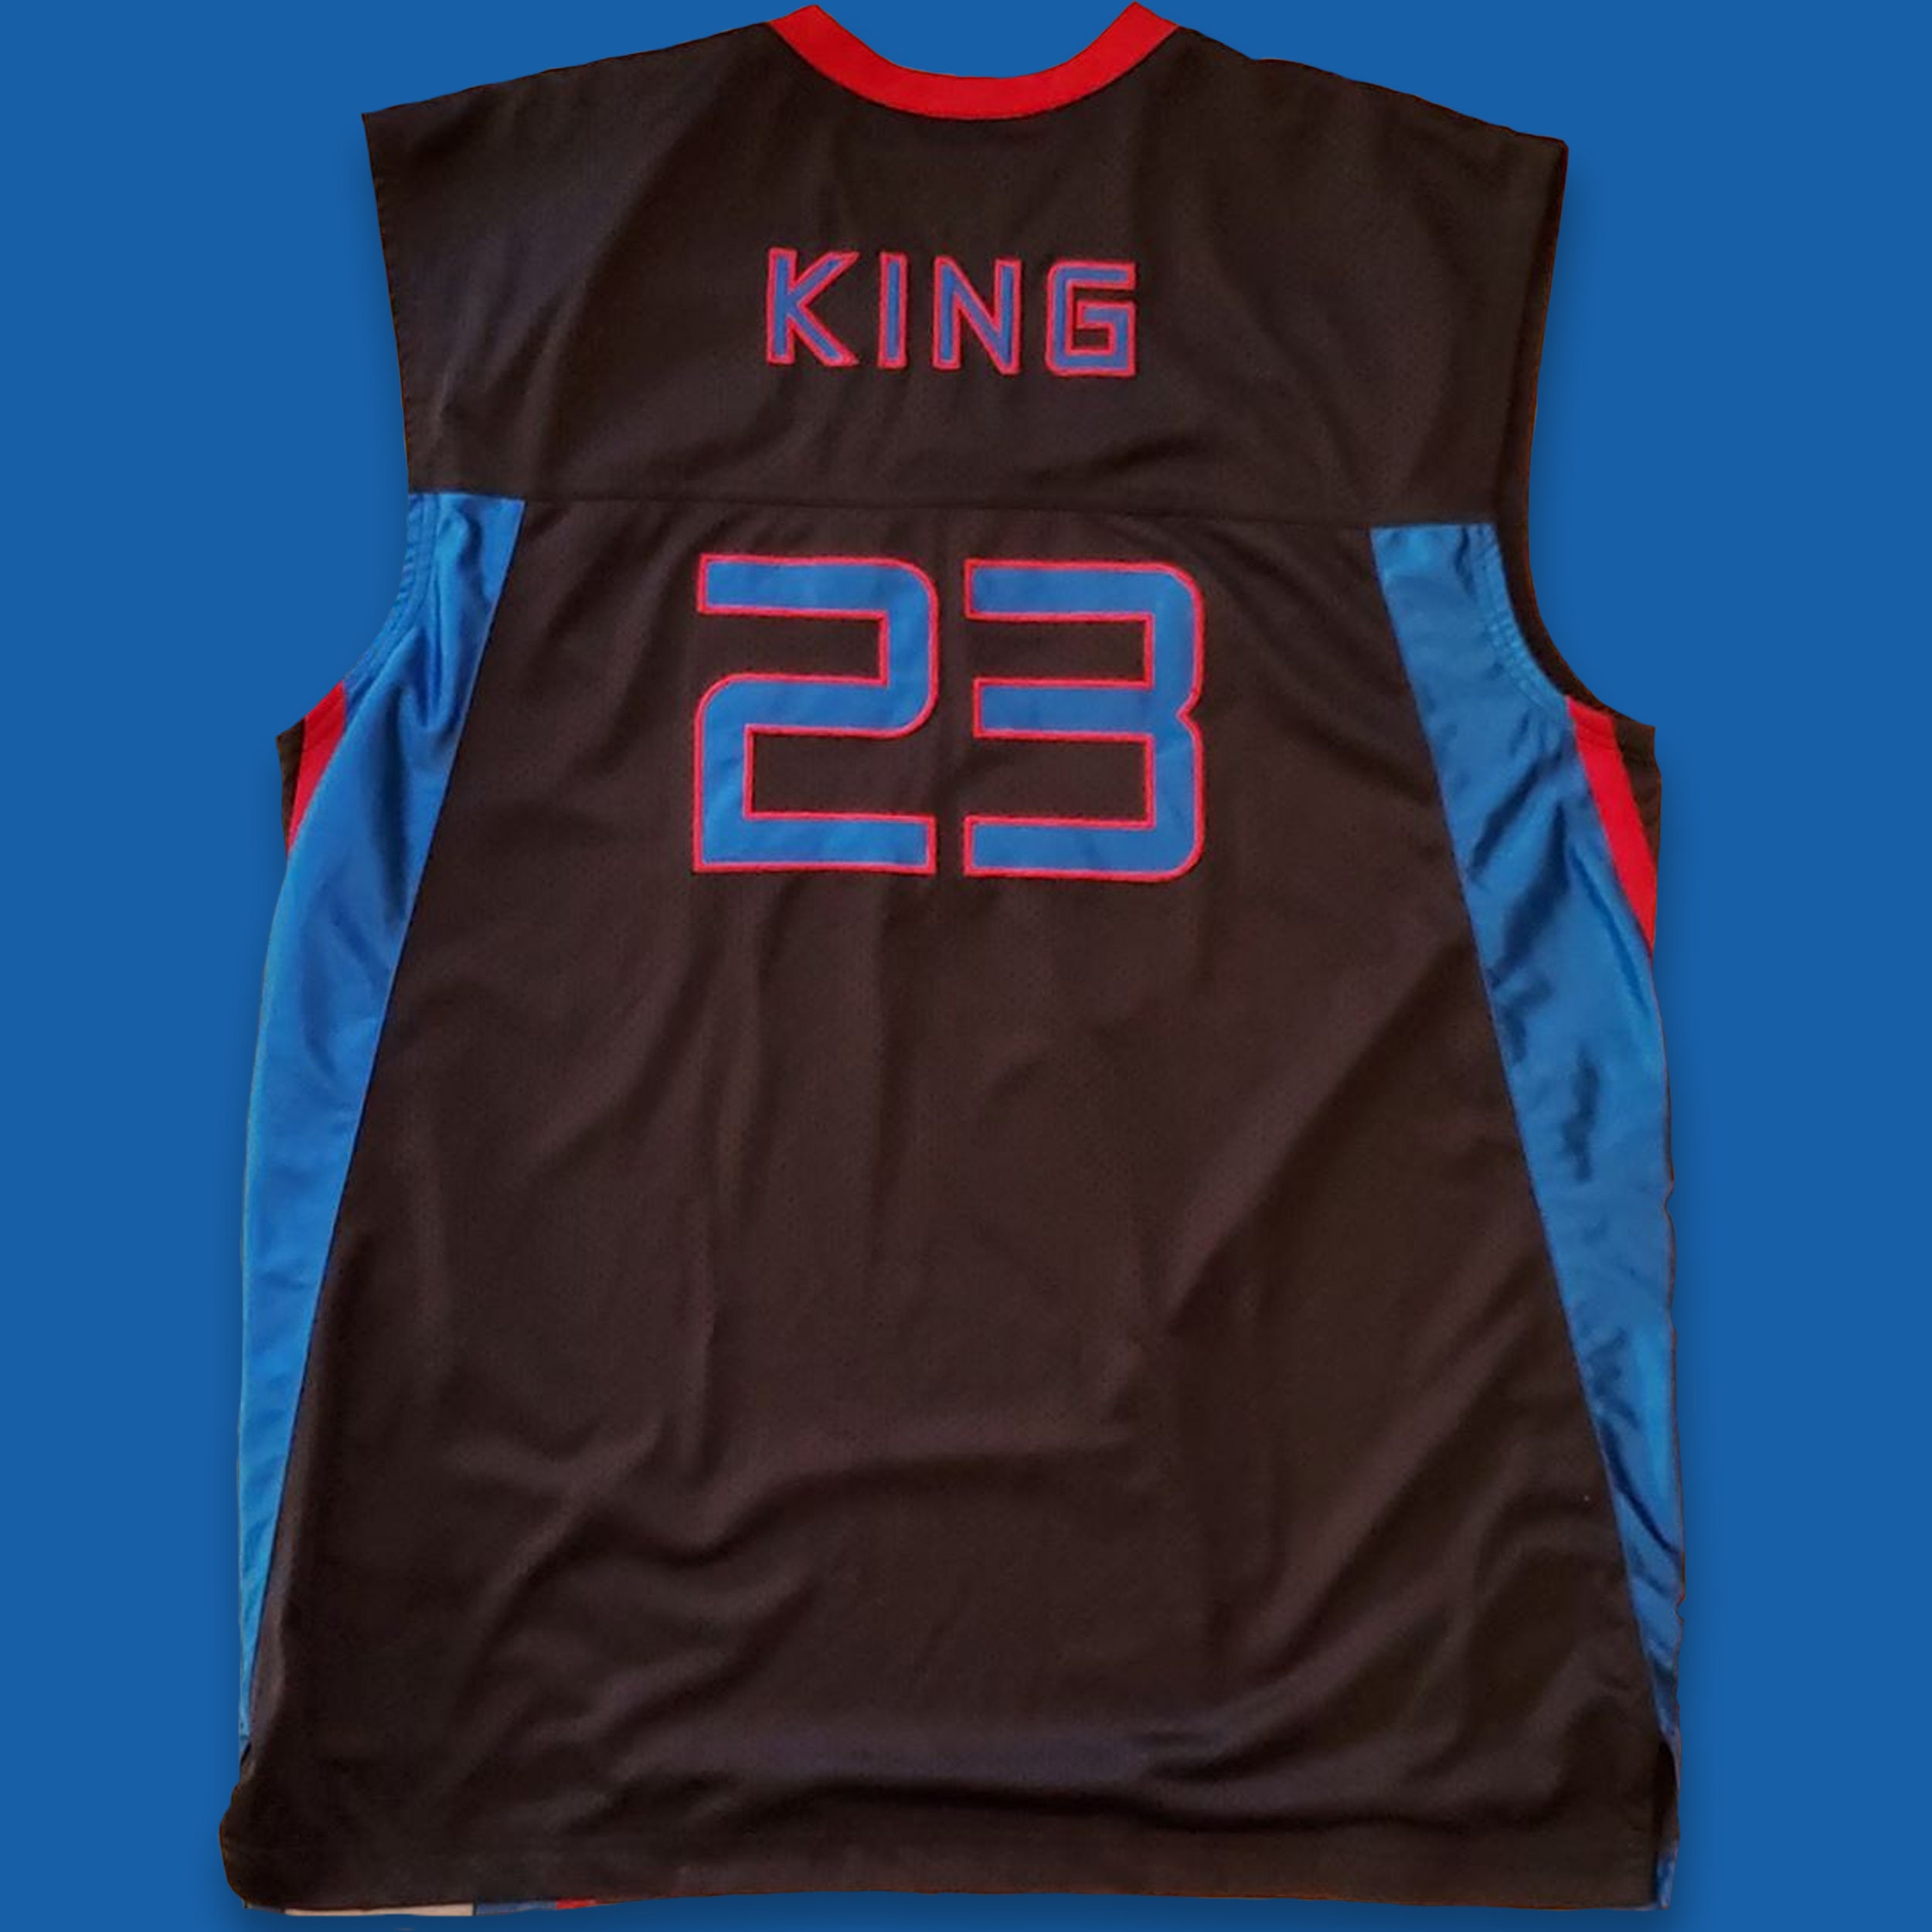 LeBron James from Cleveland Cavaliers  Nba jersey, Baller clothes, Sports  uniforms